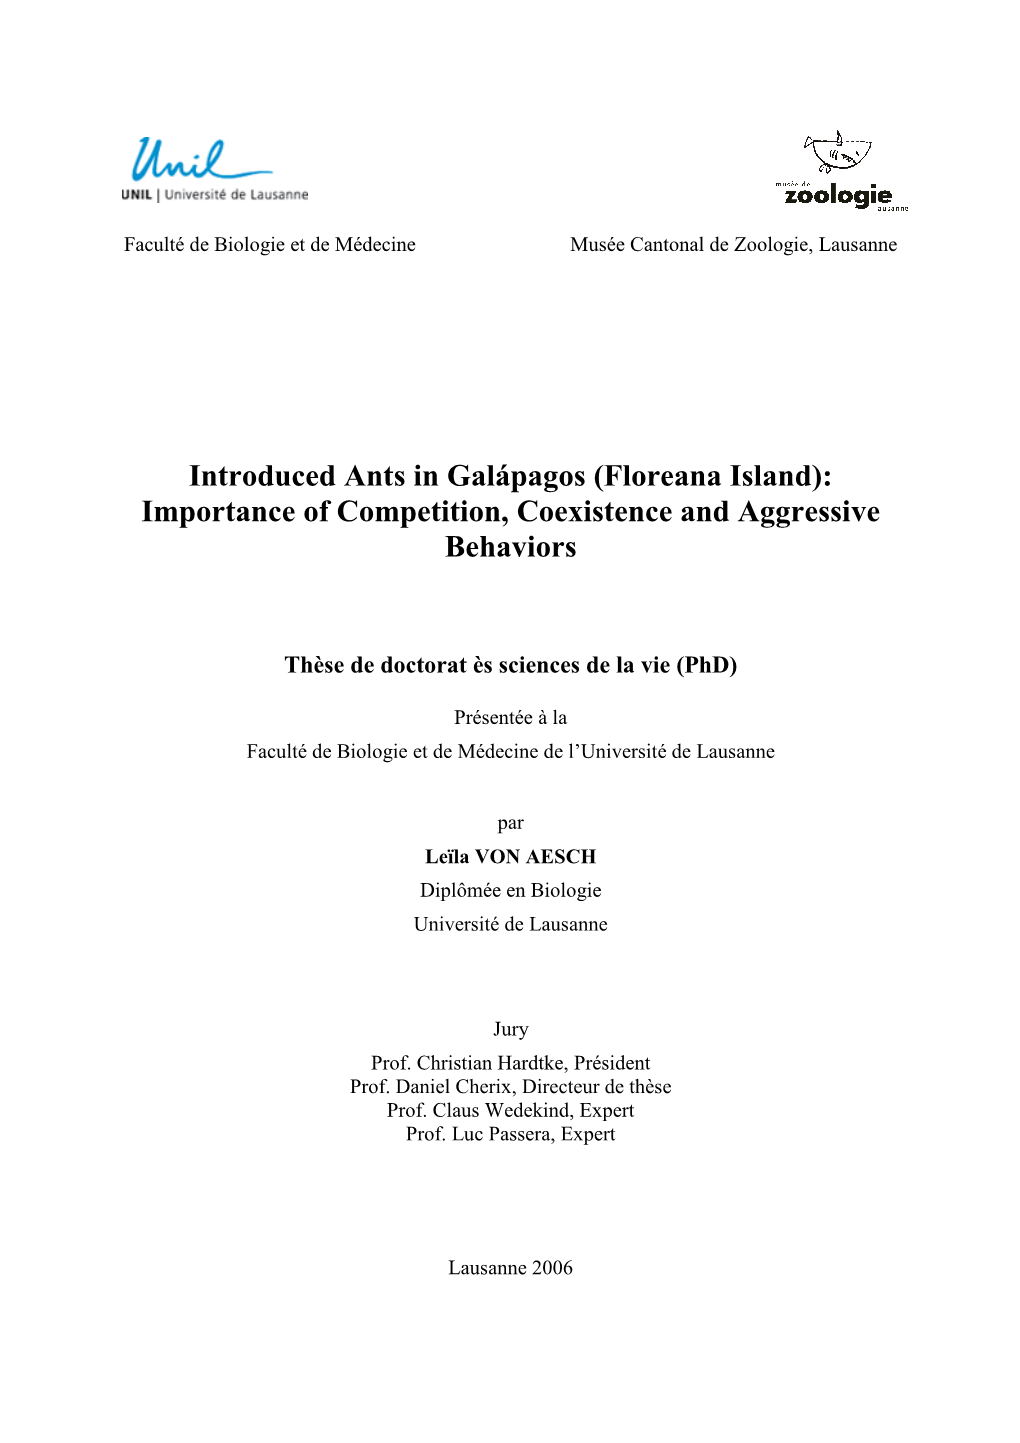 Introduced Ants in Galápagos (Floreana Island): Importance of Competition, Coexistence and Aggressive Behaviors